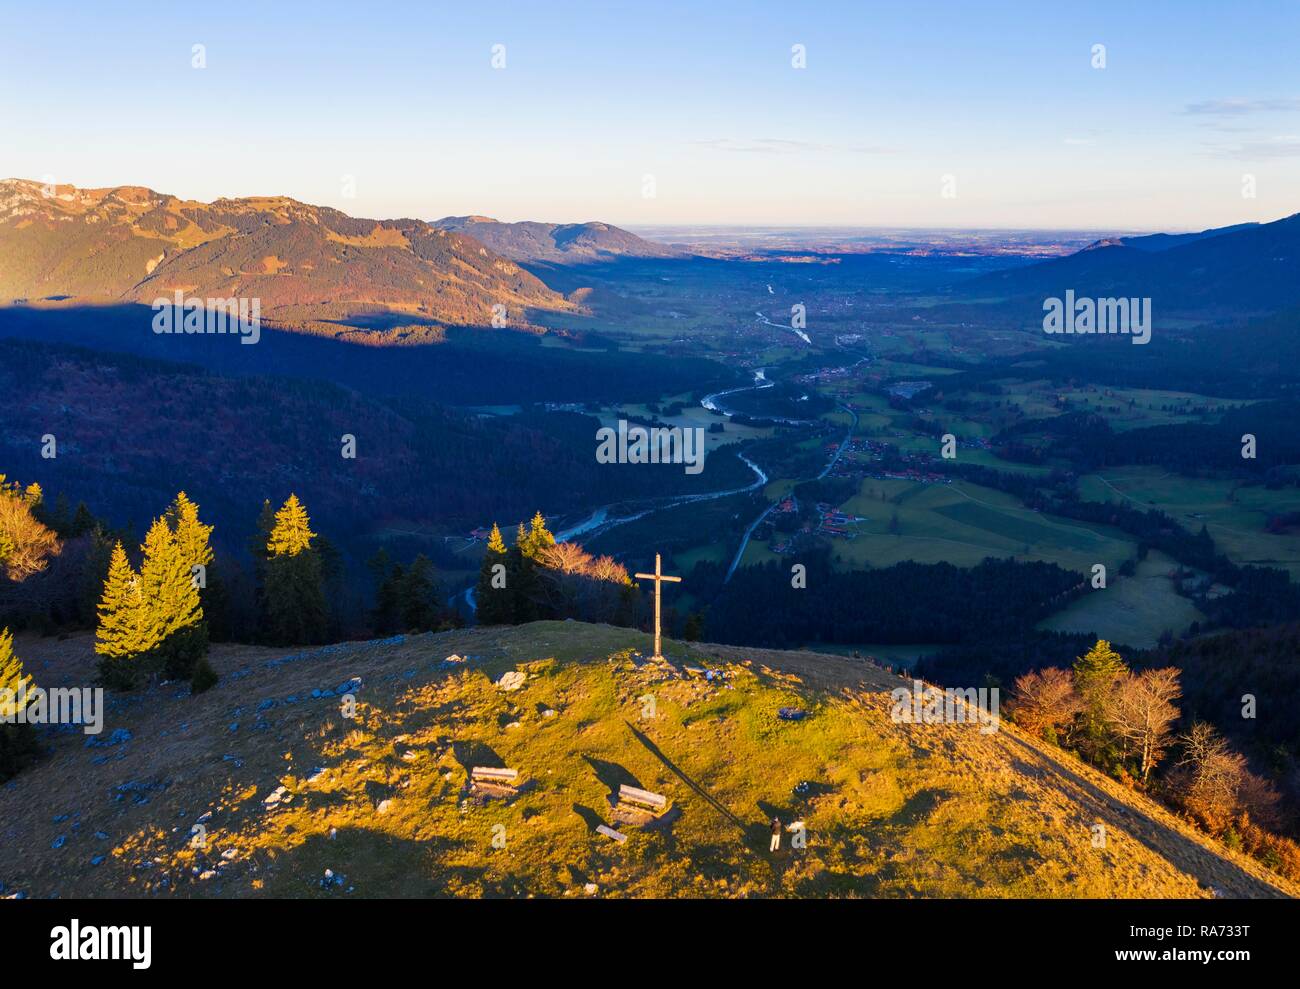 Sunrise on the high alp near Lenggries, view over the Isar valley, drones, Isarwinkel, Upper Bavaria, Bavaria, Germany Stock Photo